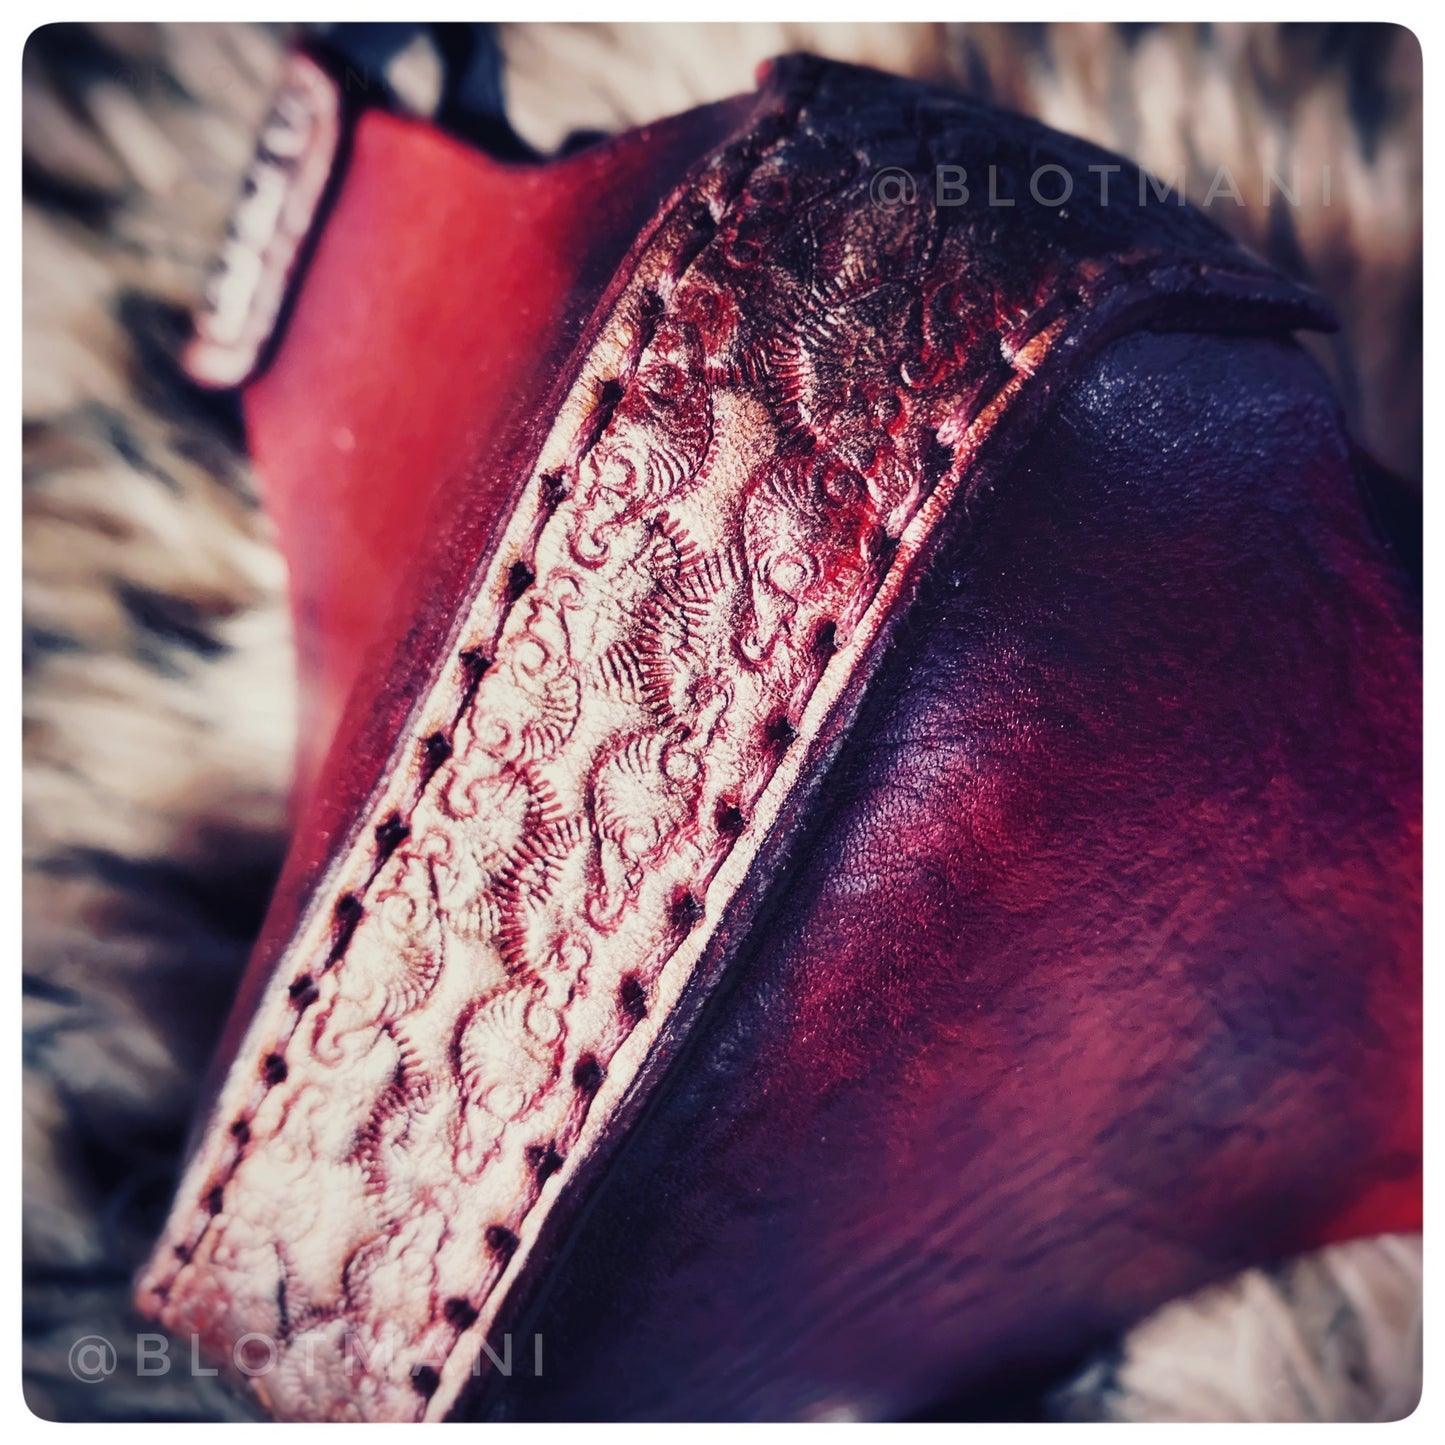 Leather face mask design 1 LAST ONE ~ FREE DHL EXPRESS SHIPPING